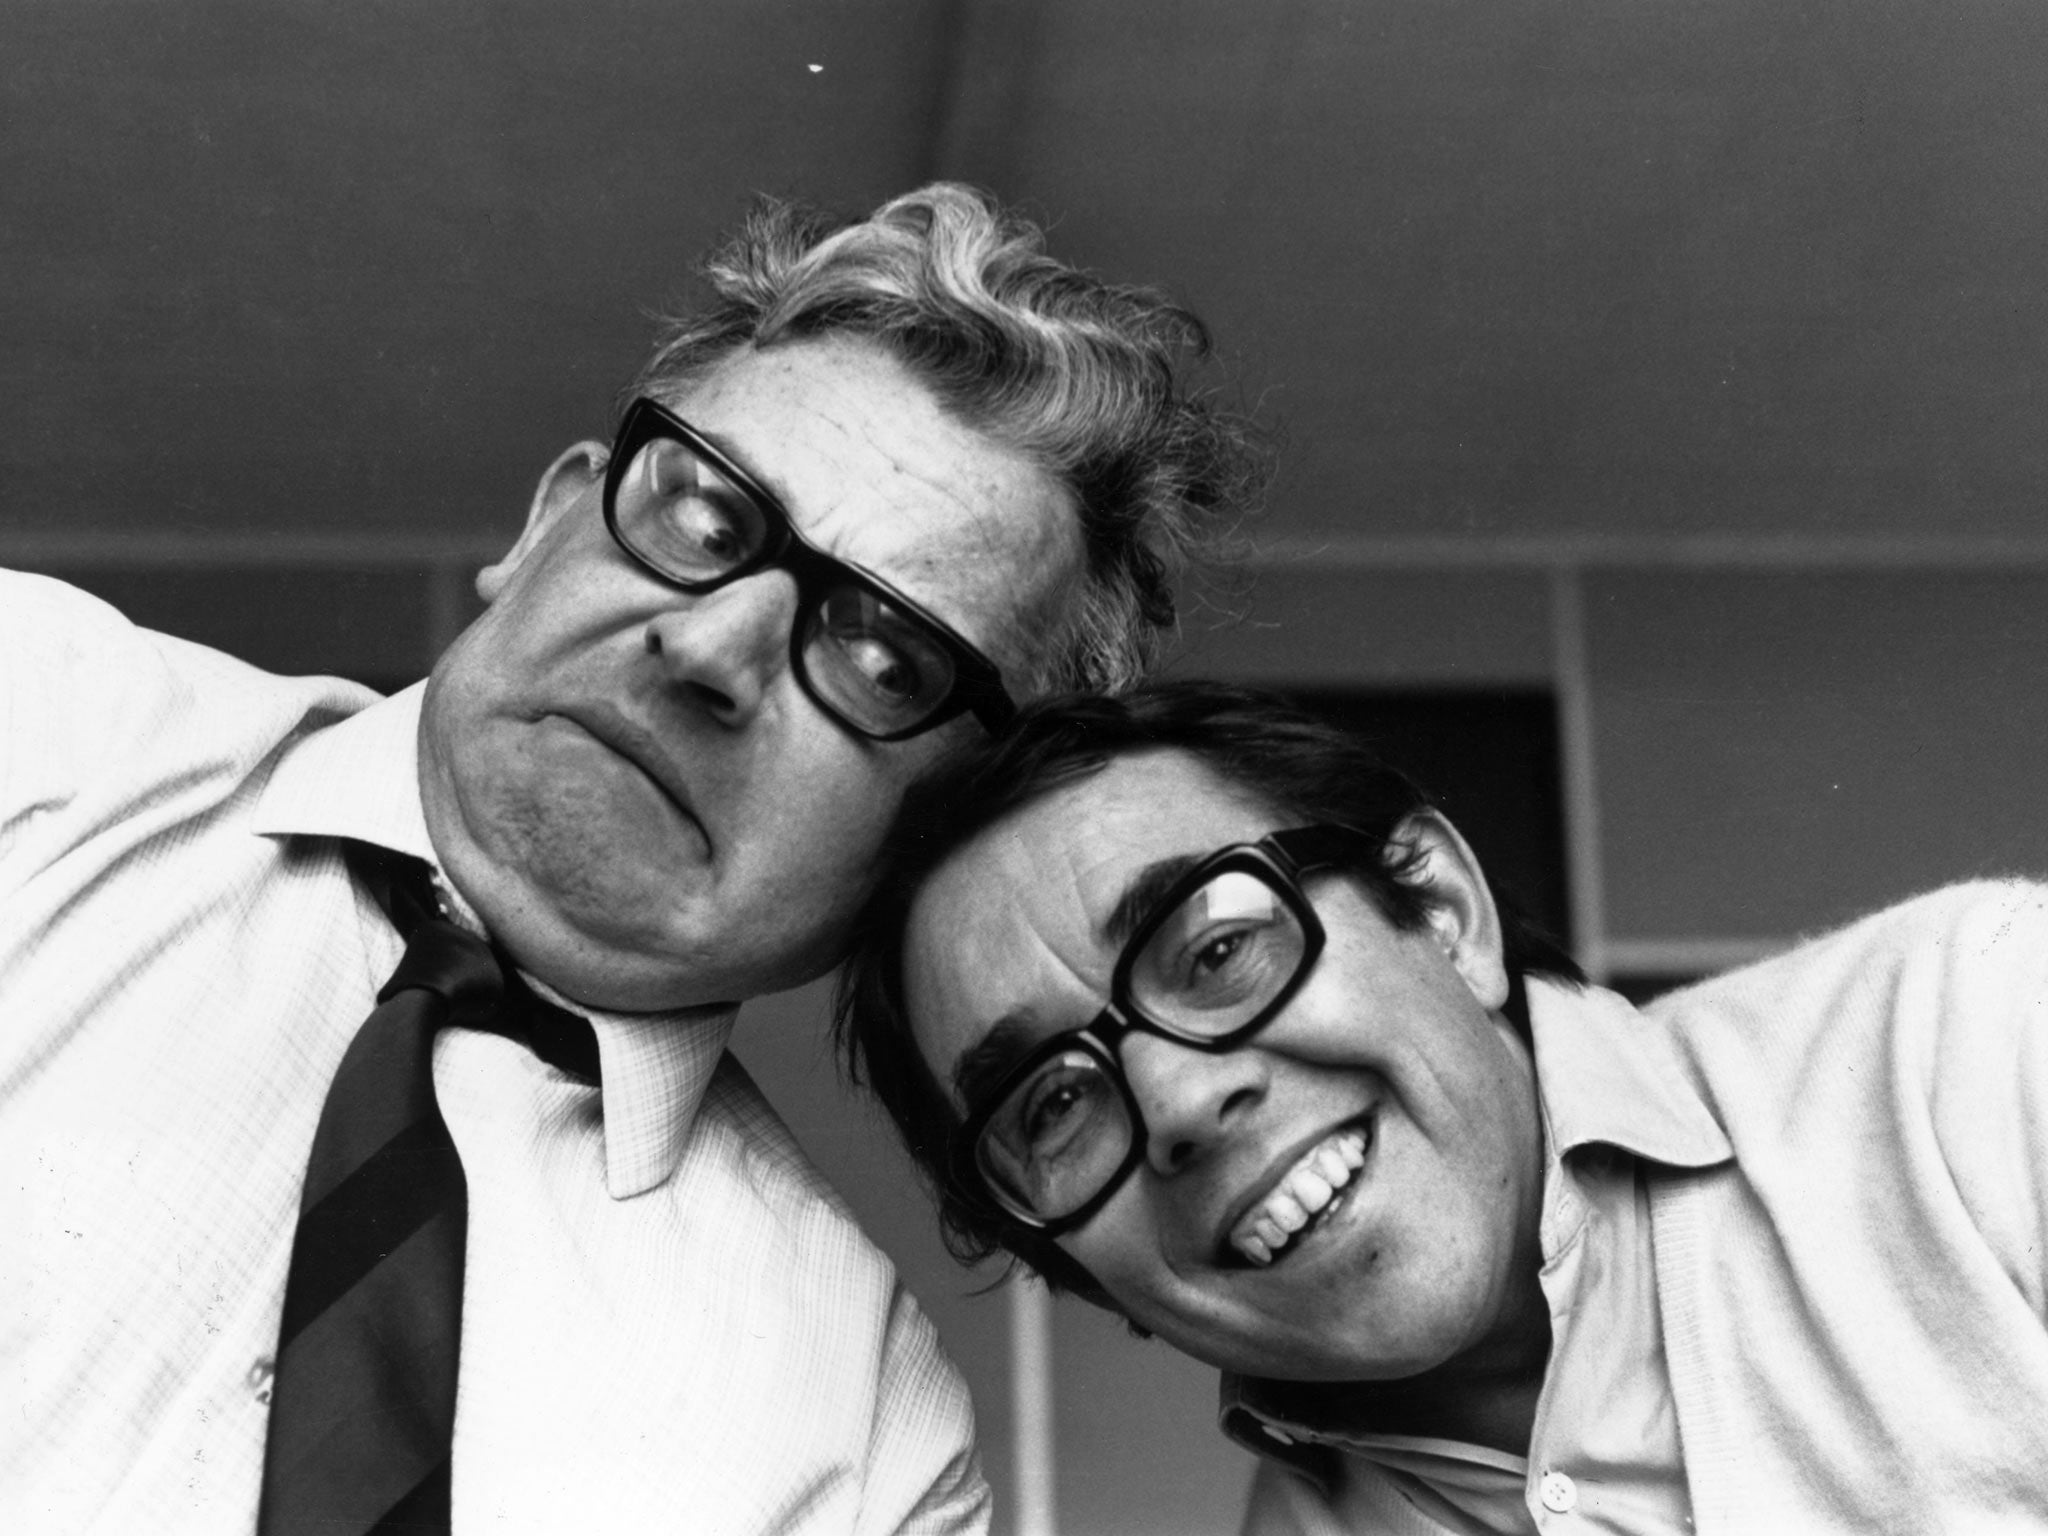 Ronnie Corbett (right) with comedic partner Ronnie Barker in 1969